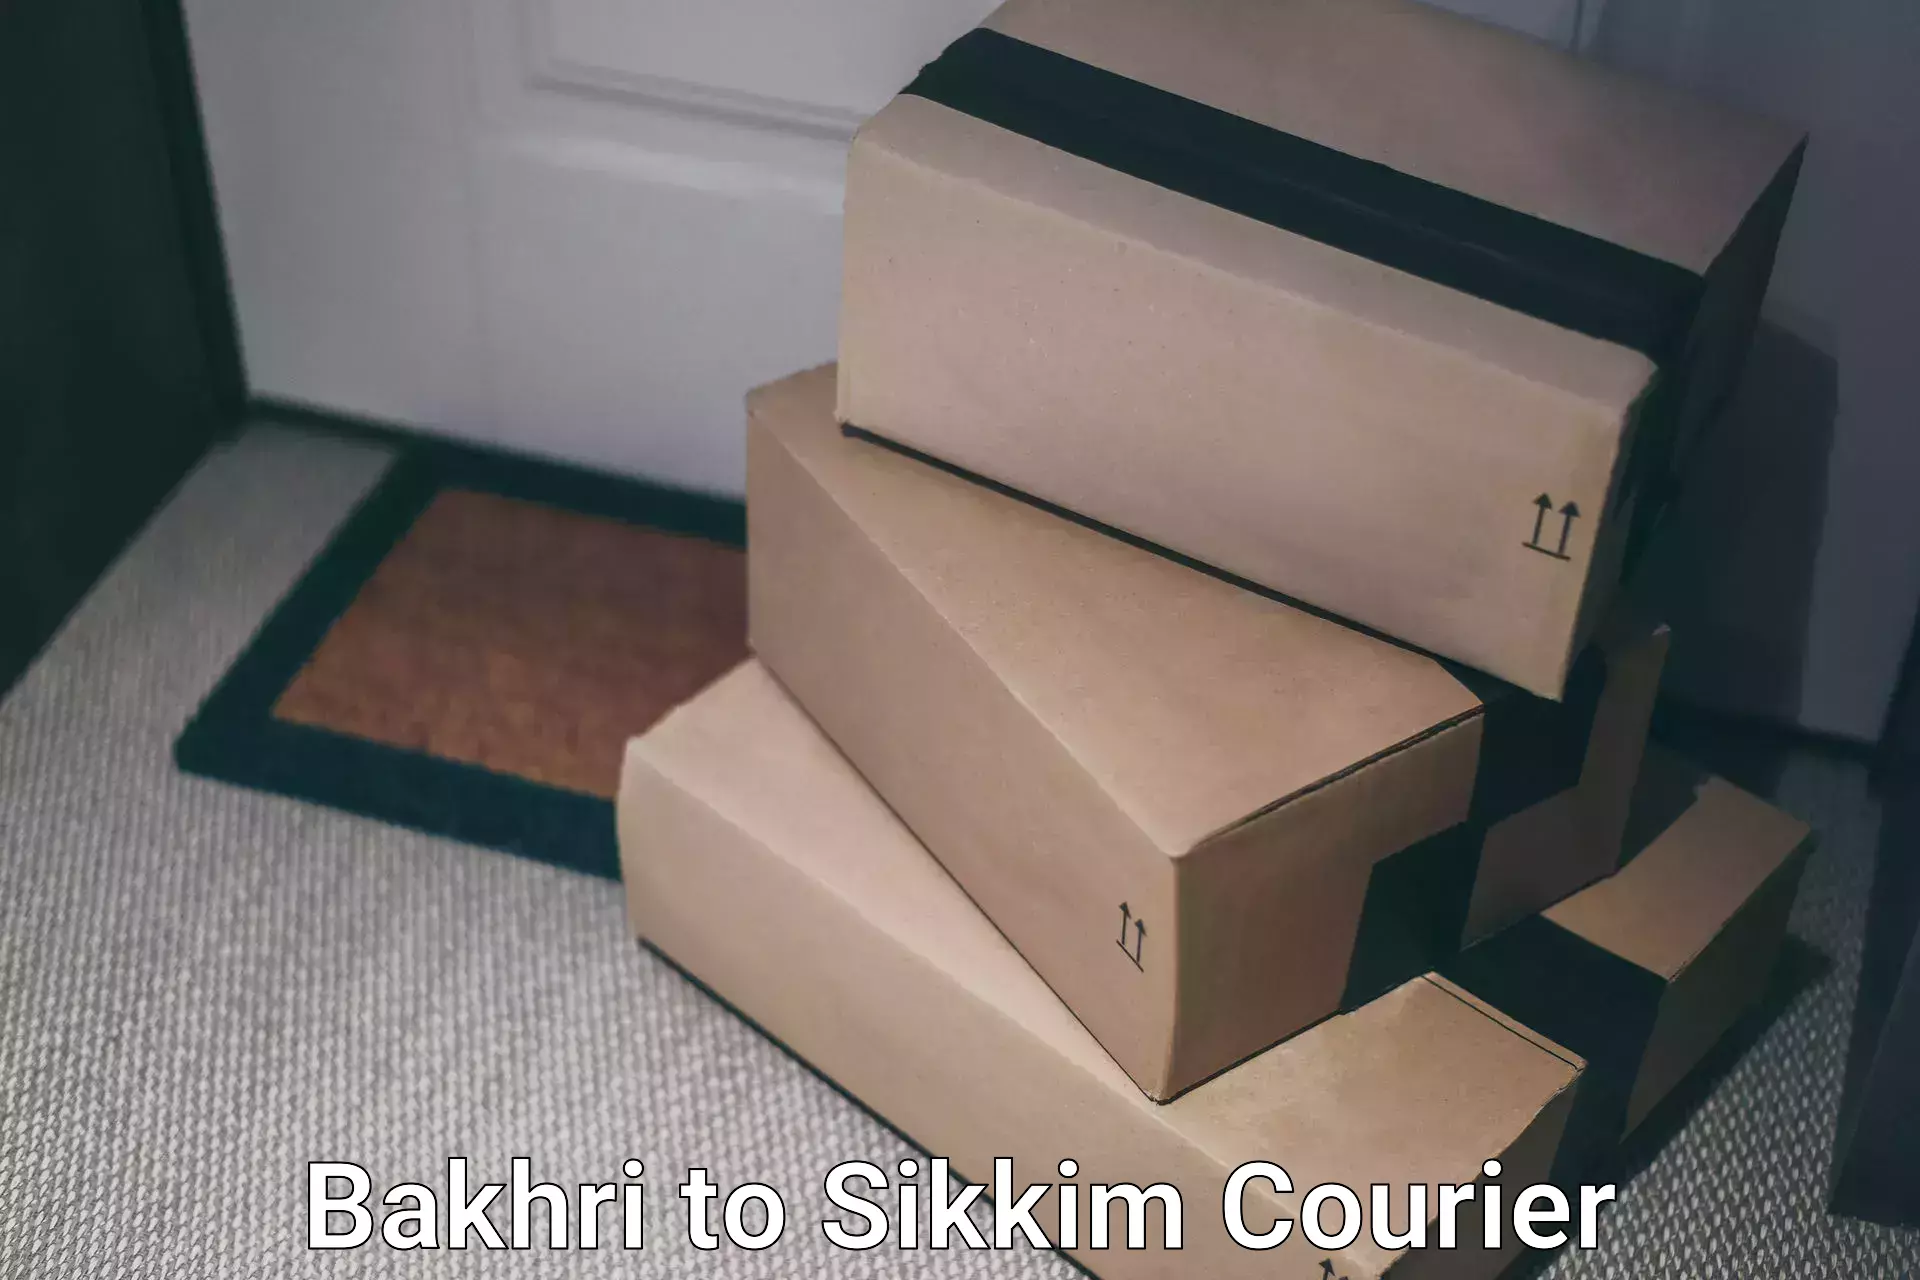 Subscription-based courier Bakhri to Sikkim